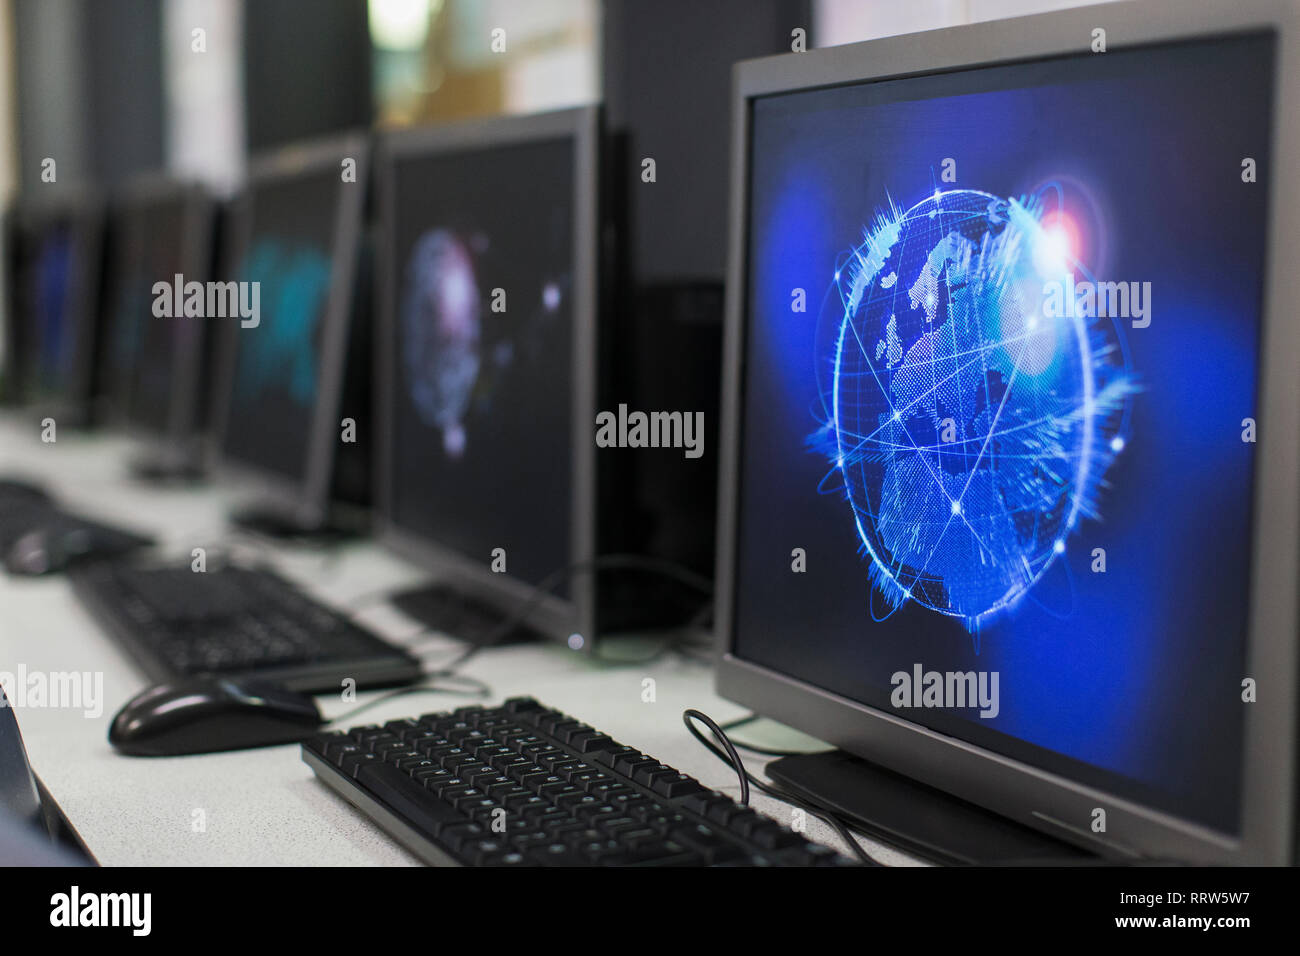 Global communications screen saver on computer in computer lab Stock Photo